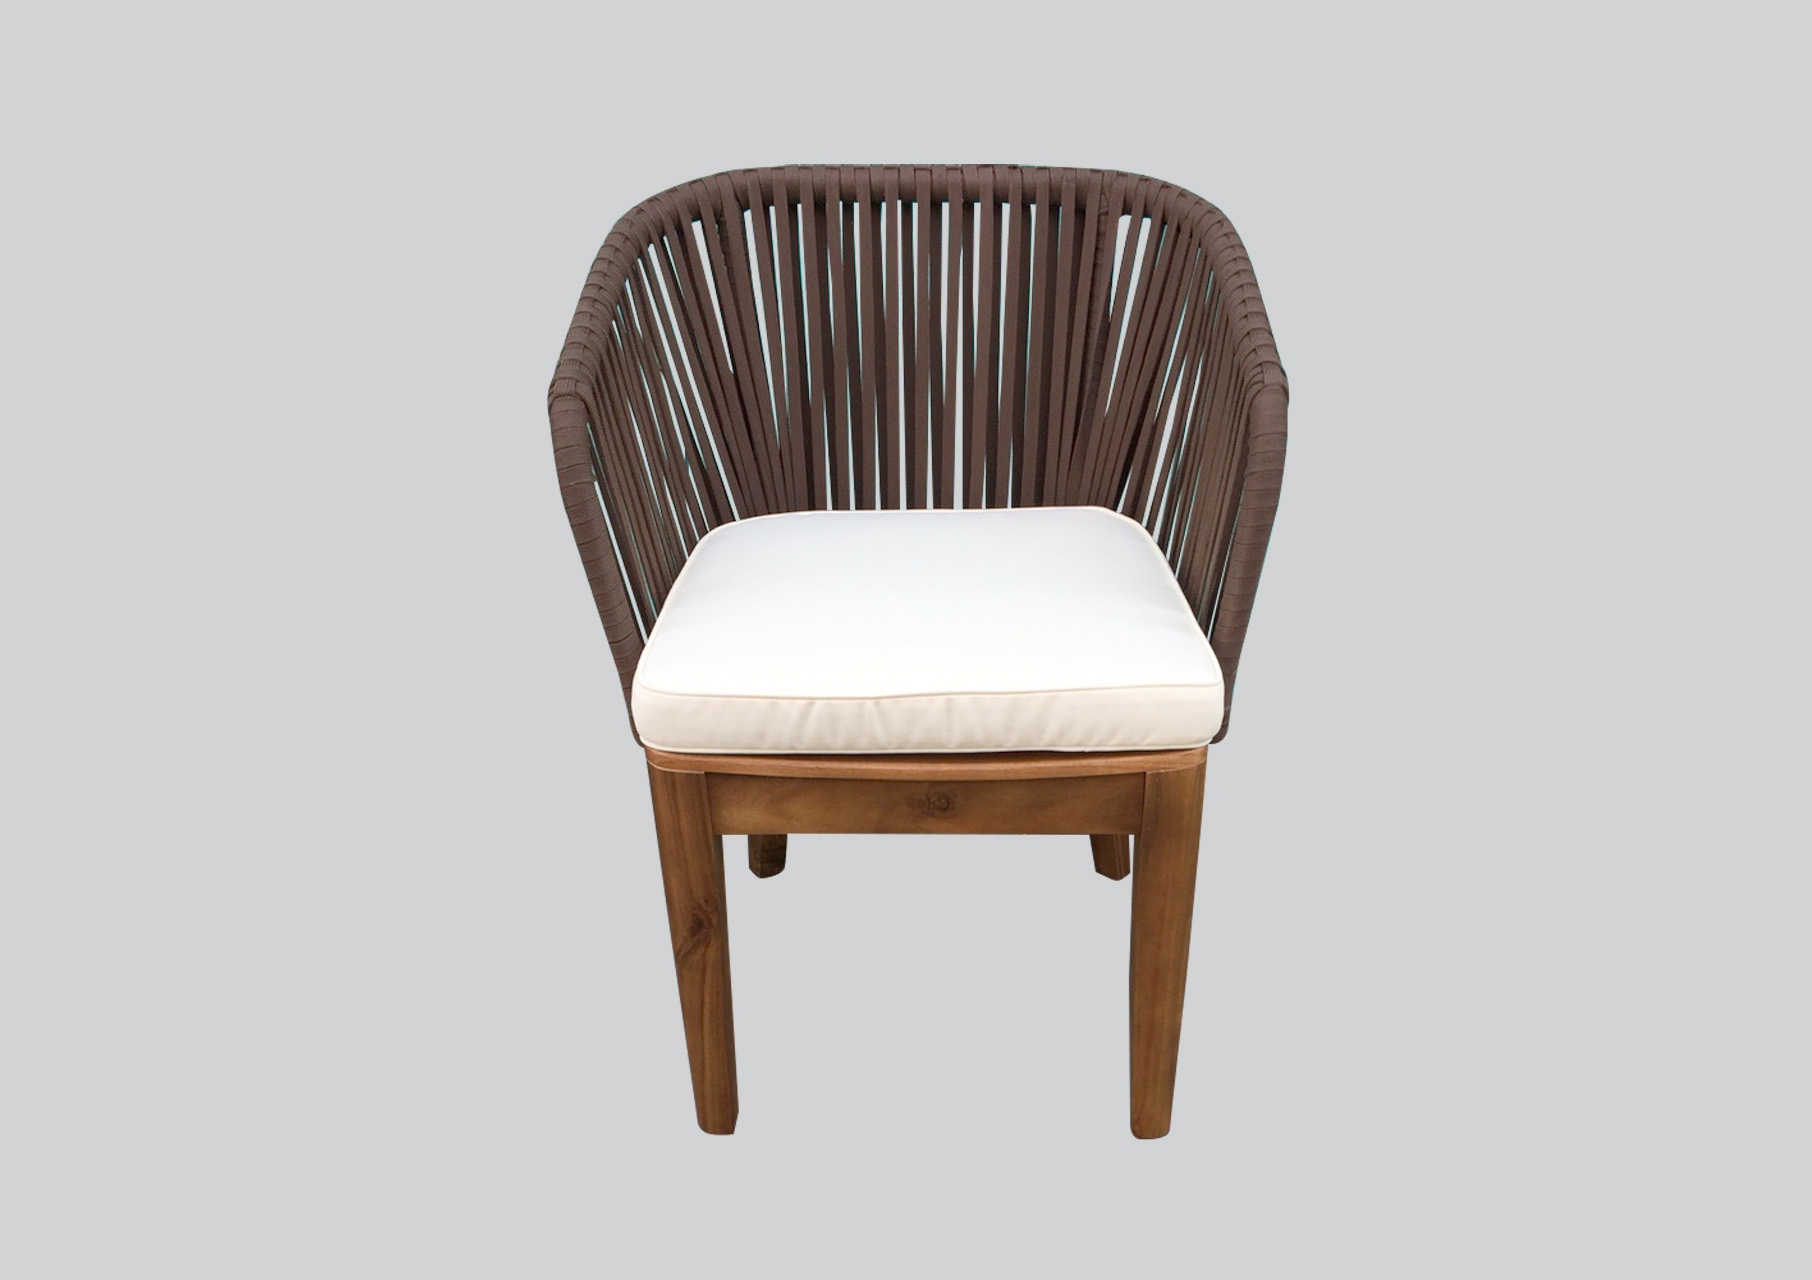 Outdoor Dining Chair Noosa W600 x D580 x H770mm